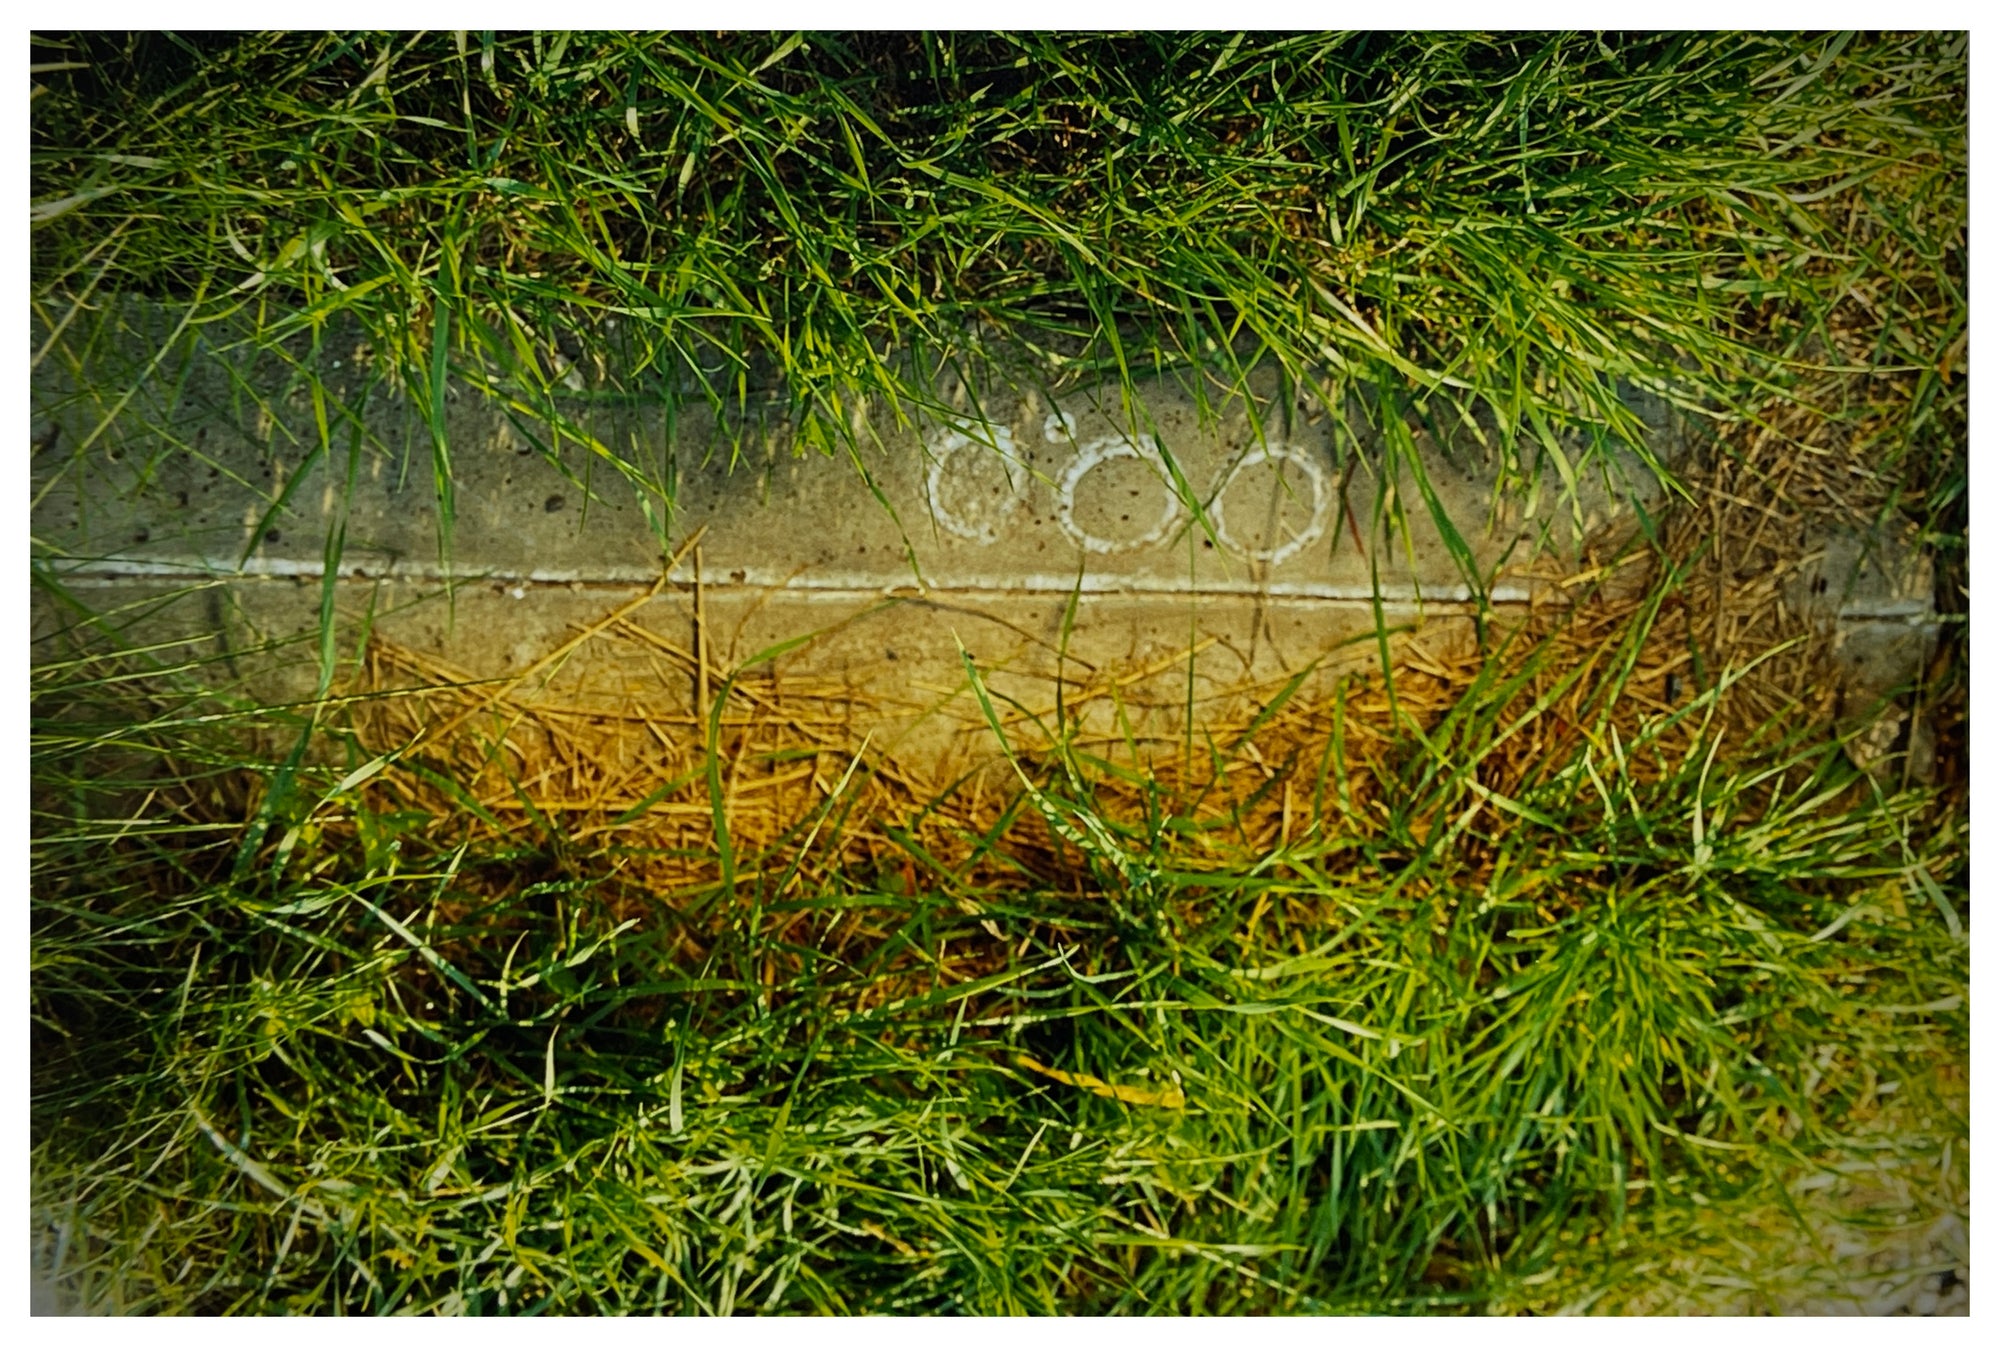 Photograph by Richard Heeps.  Meridian line marked above in chalk as 0°00, surrounded by grass.